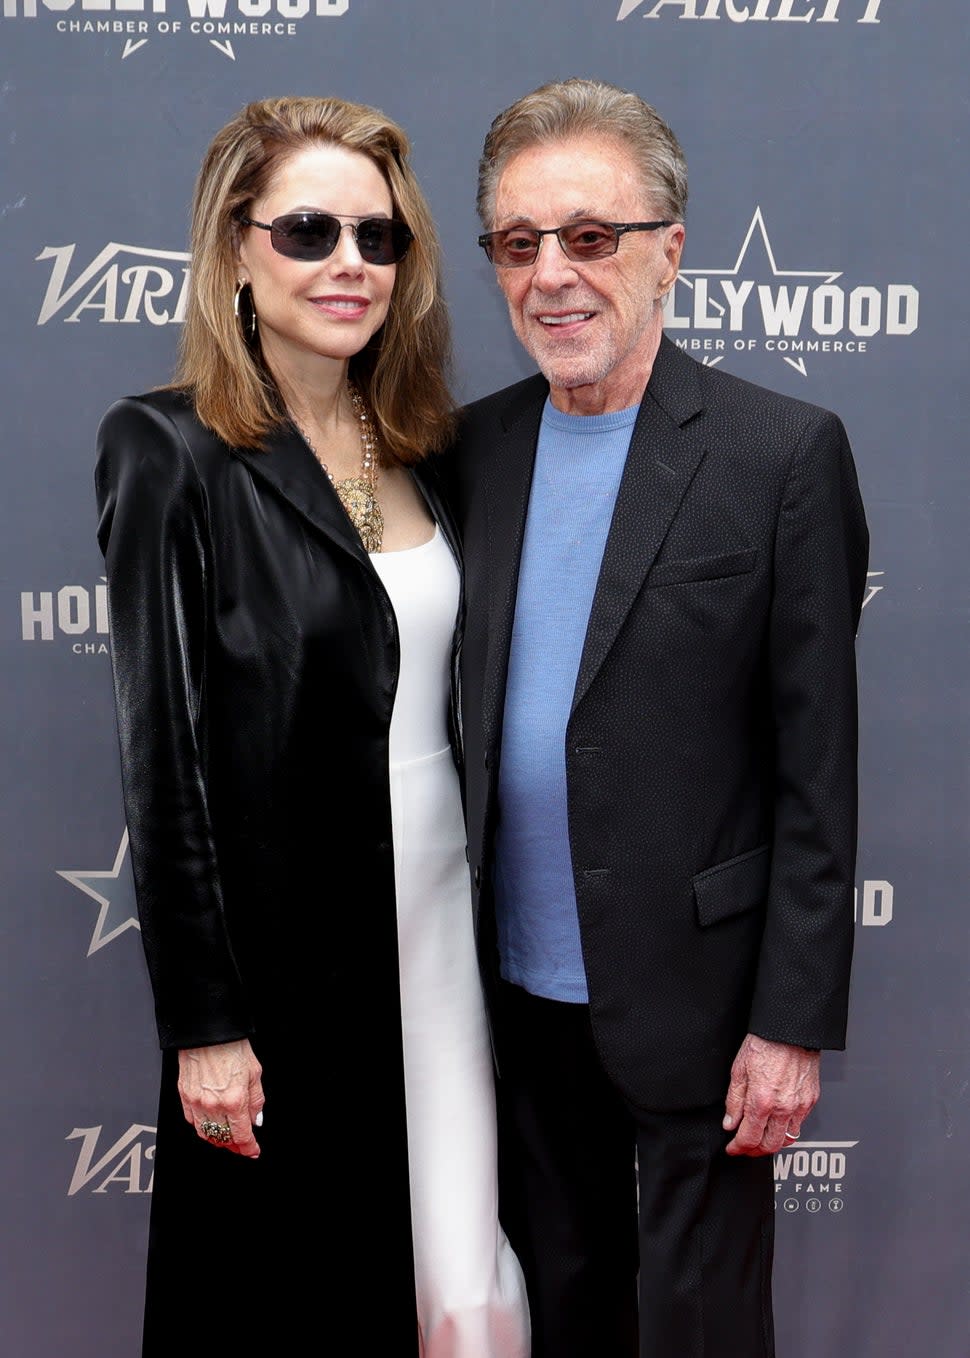 Jackie Jacobs and Frankie Valli at the star ceremony honoring Frankie Valli & The Four Seasons